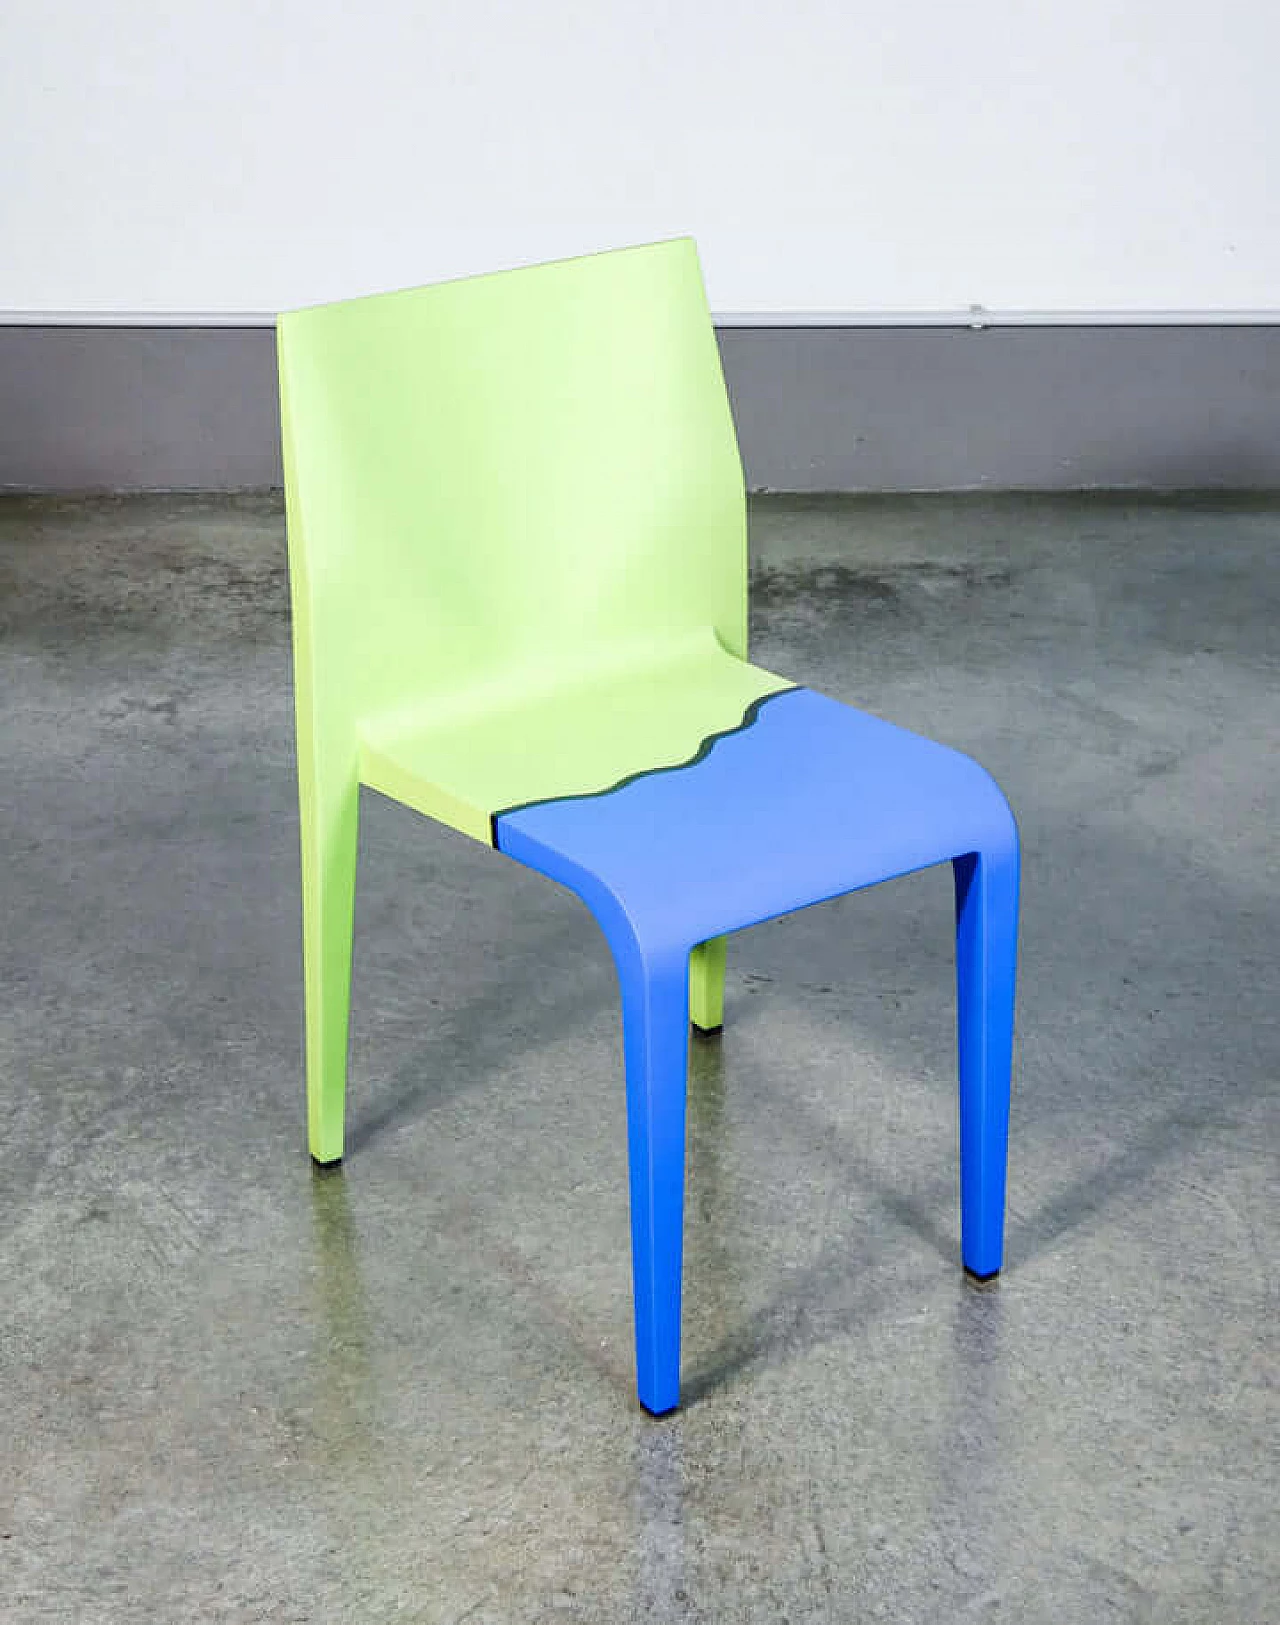 Laleggera 44 chair by Riccardo Blumer for Alias painted by Michelangelo Pistoletto, 2009 2